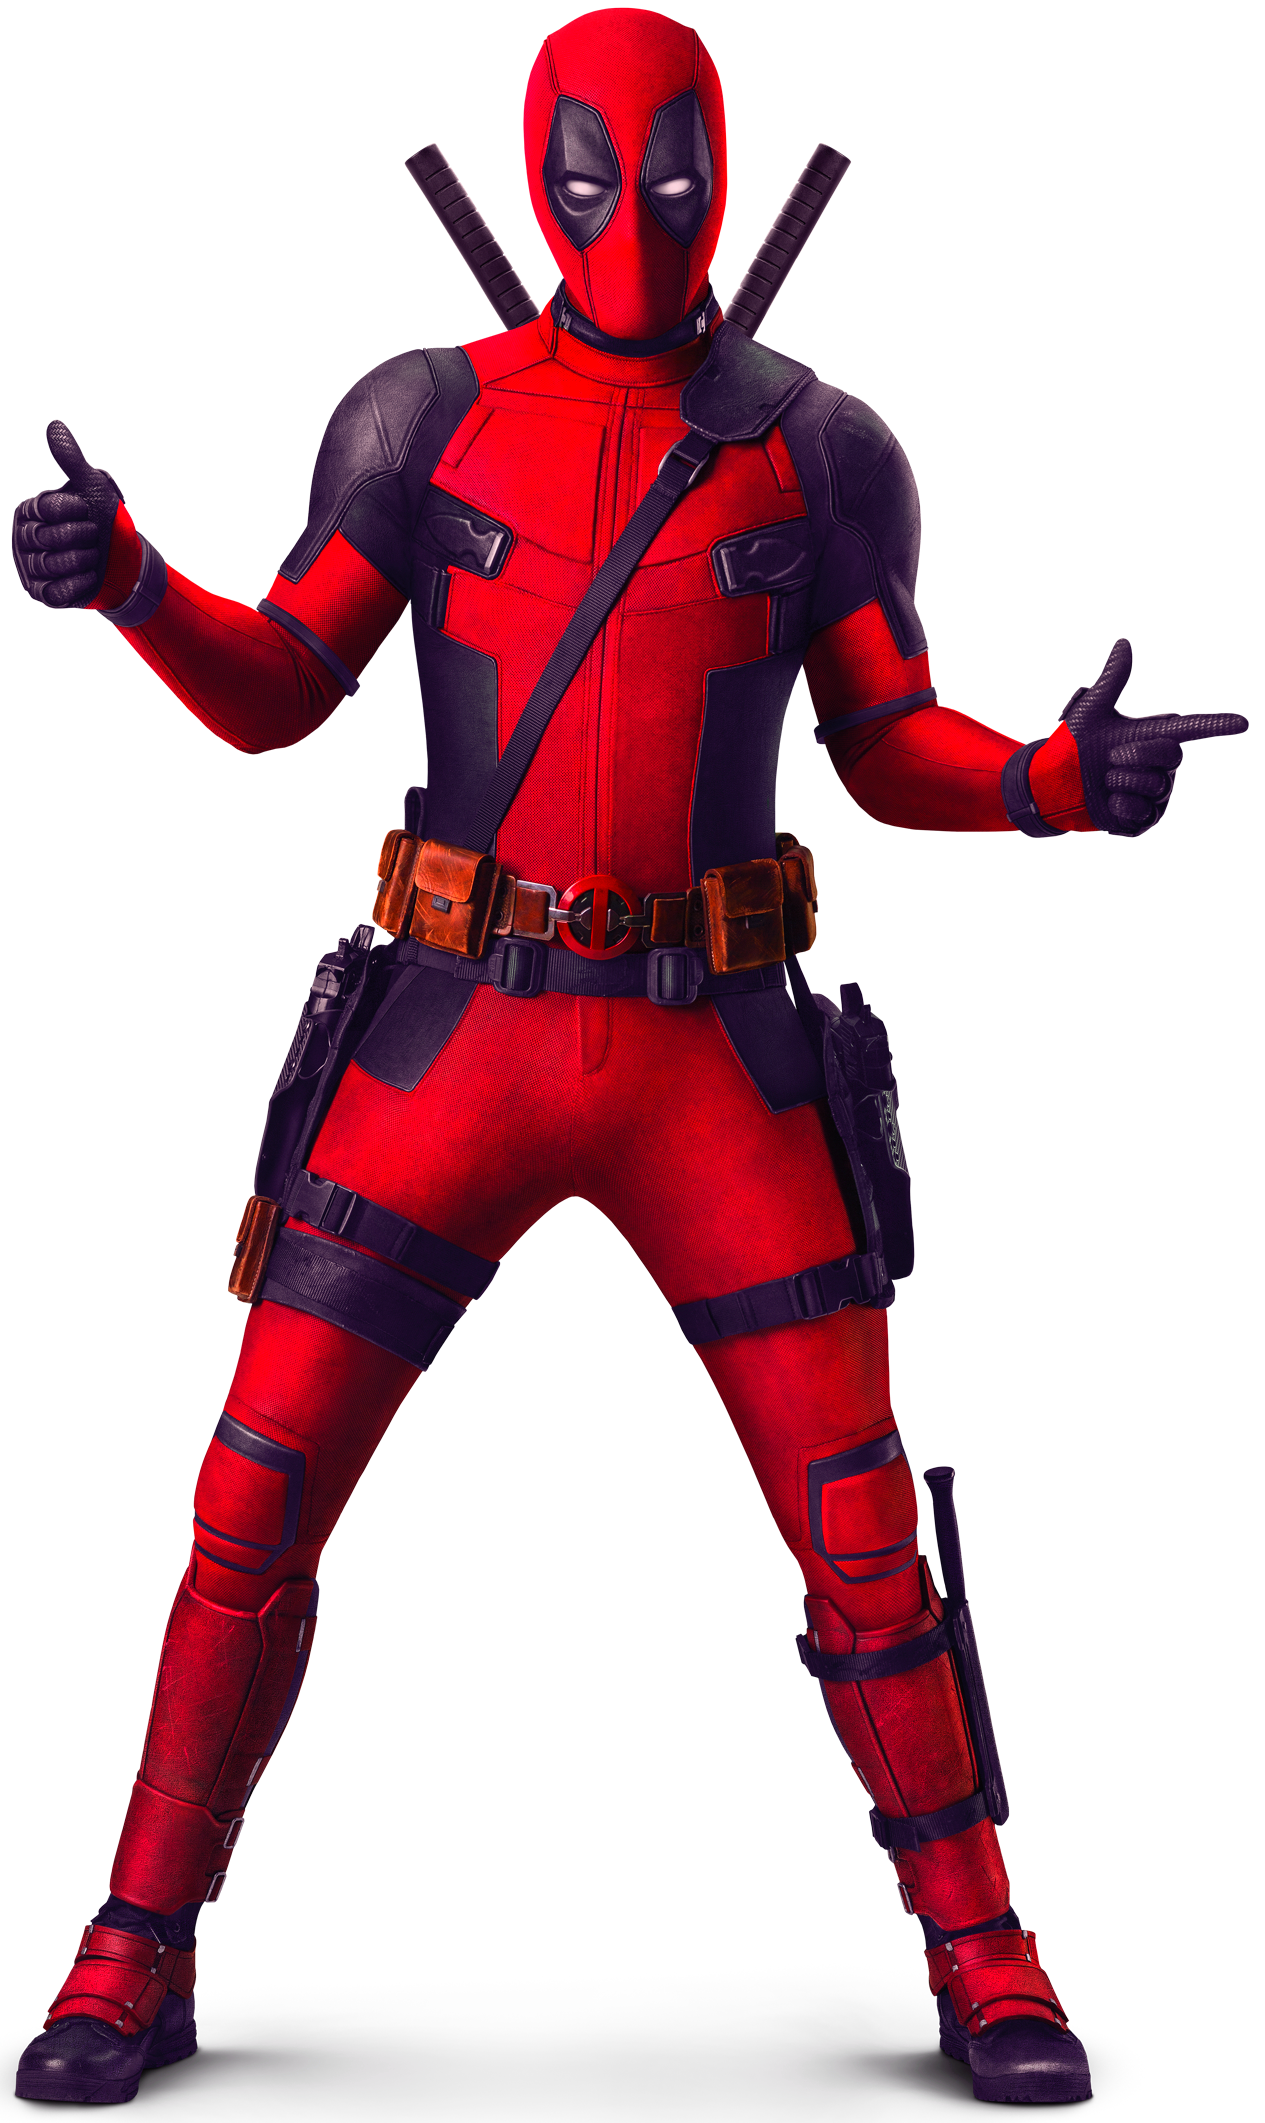 Deadpool Character Figurine Fictional Disc Bluray Film PNG Image